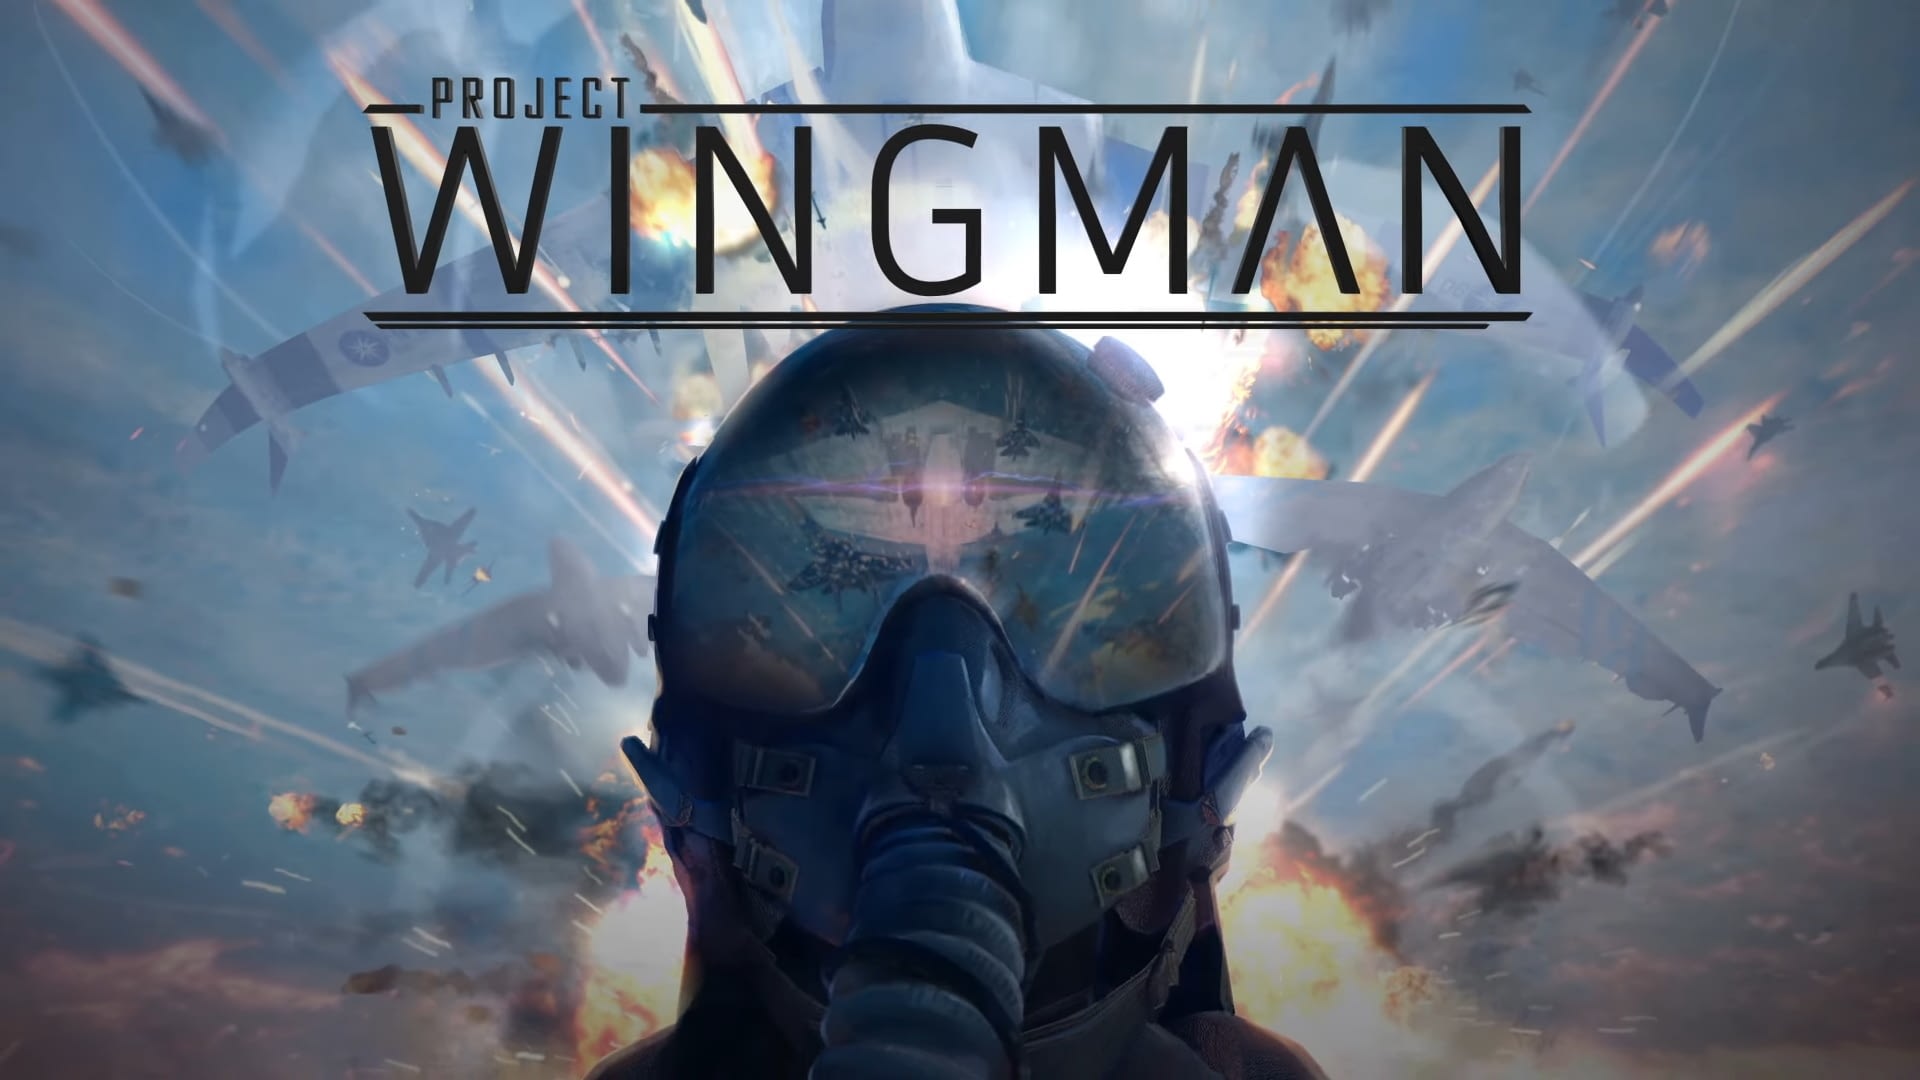 Project Wingman Brings High Octane Dogfights This December